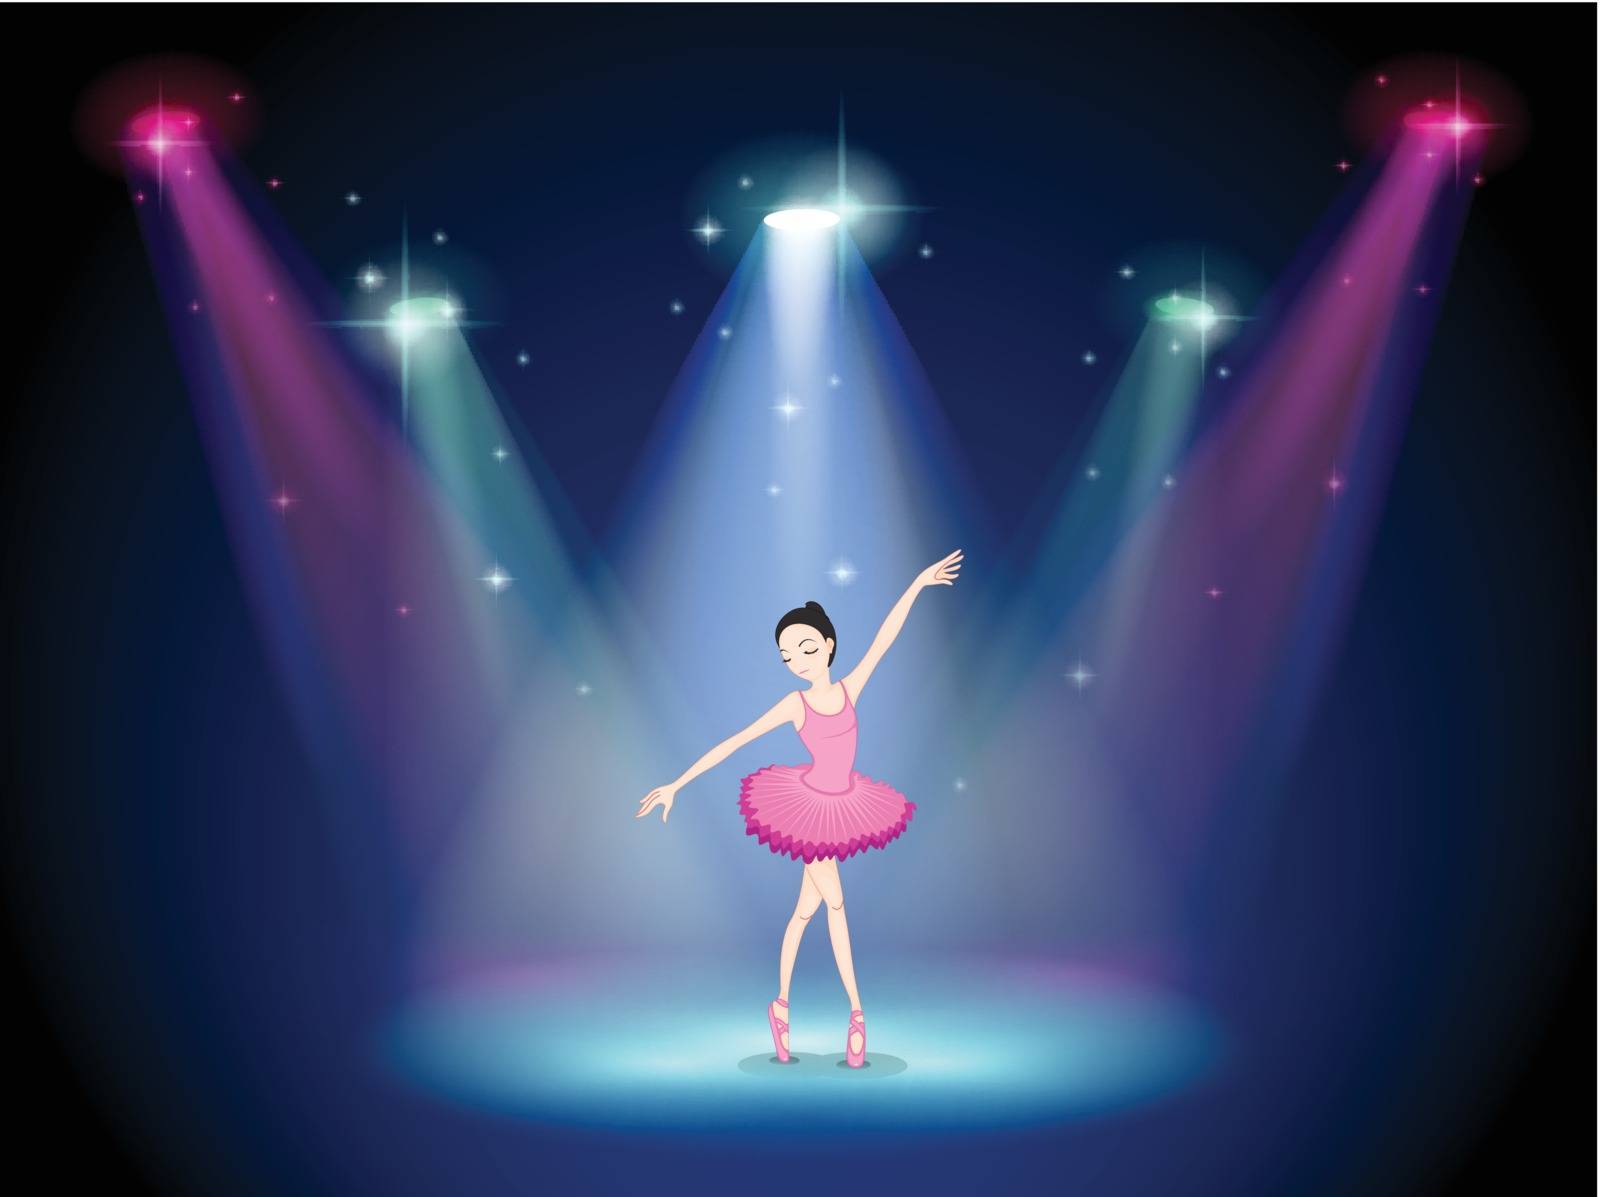 Illustration of a graceful ballerina at the center of the stage